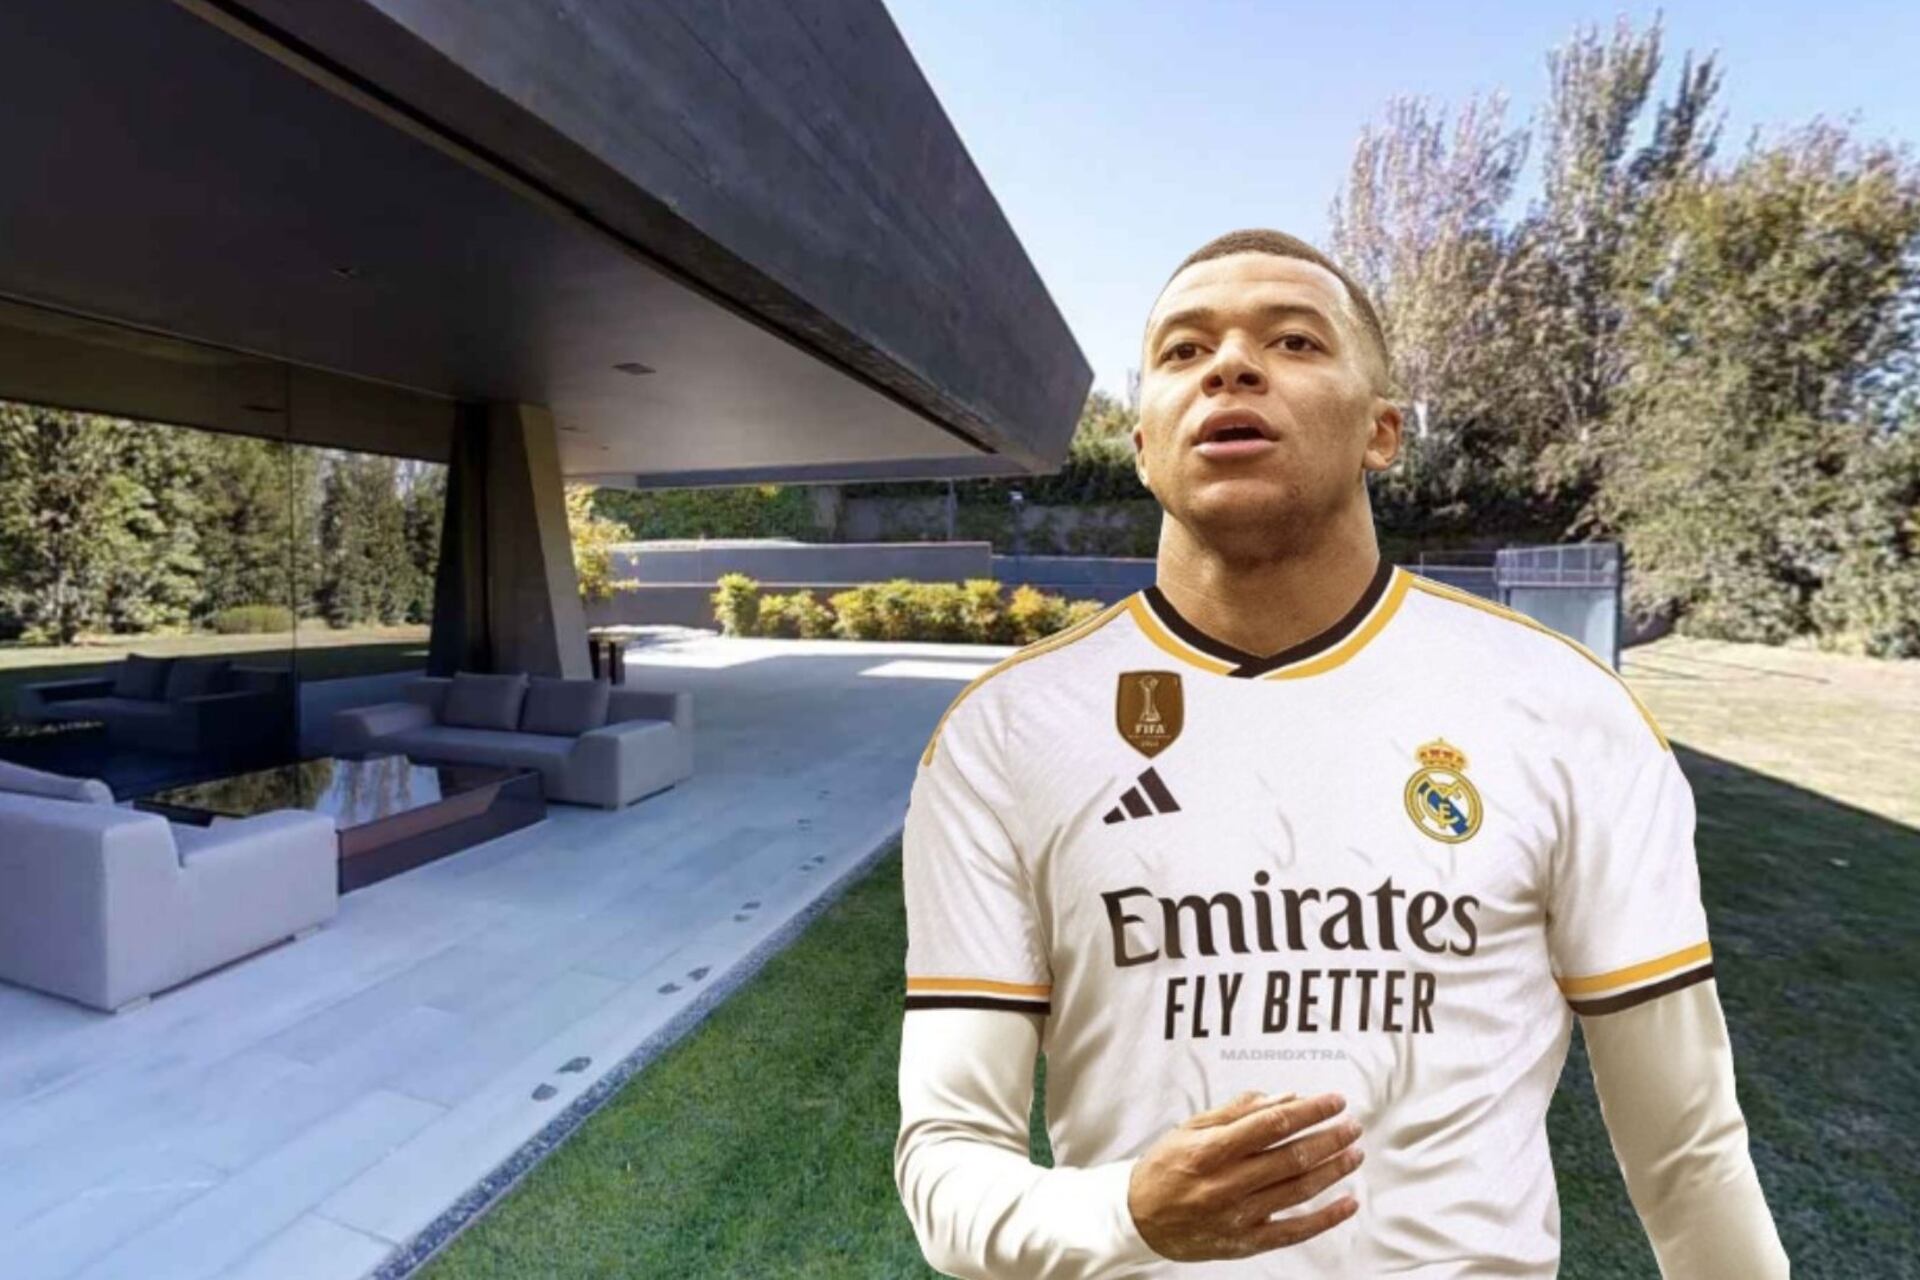 The impressive luxuries Mbappe will have when he signs with Real Madrid